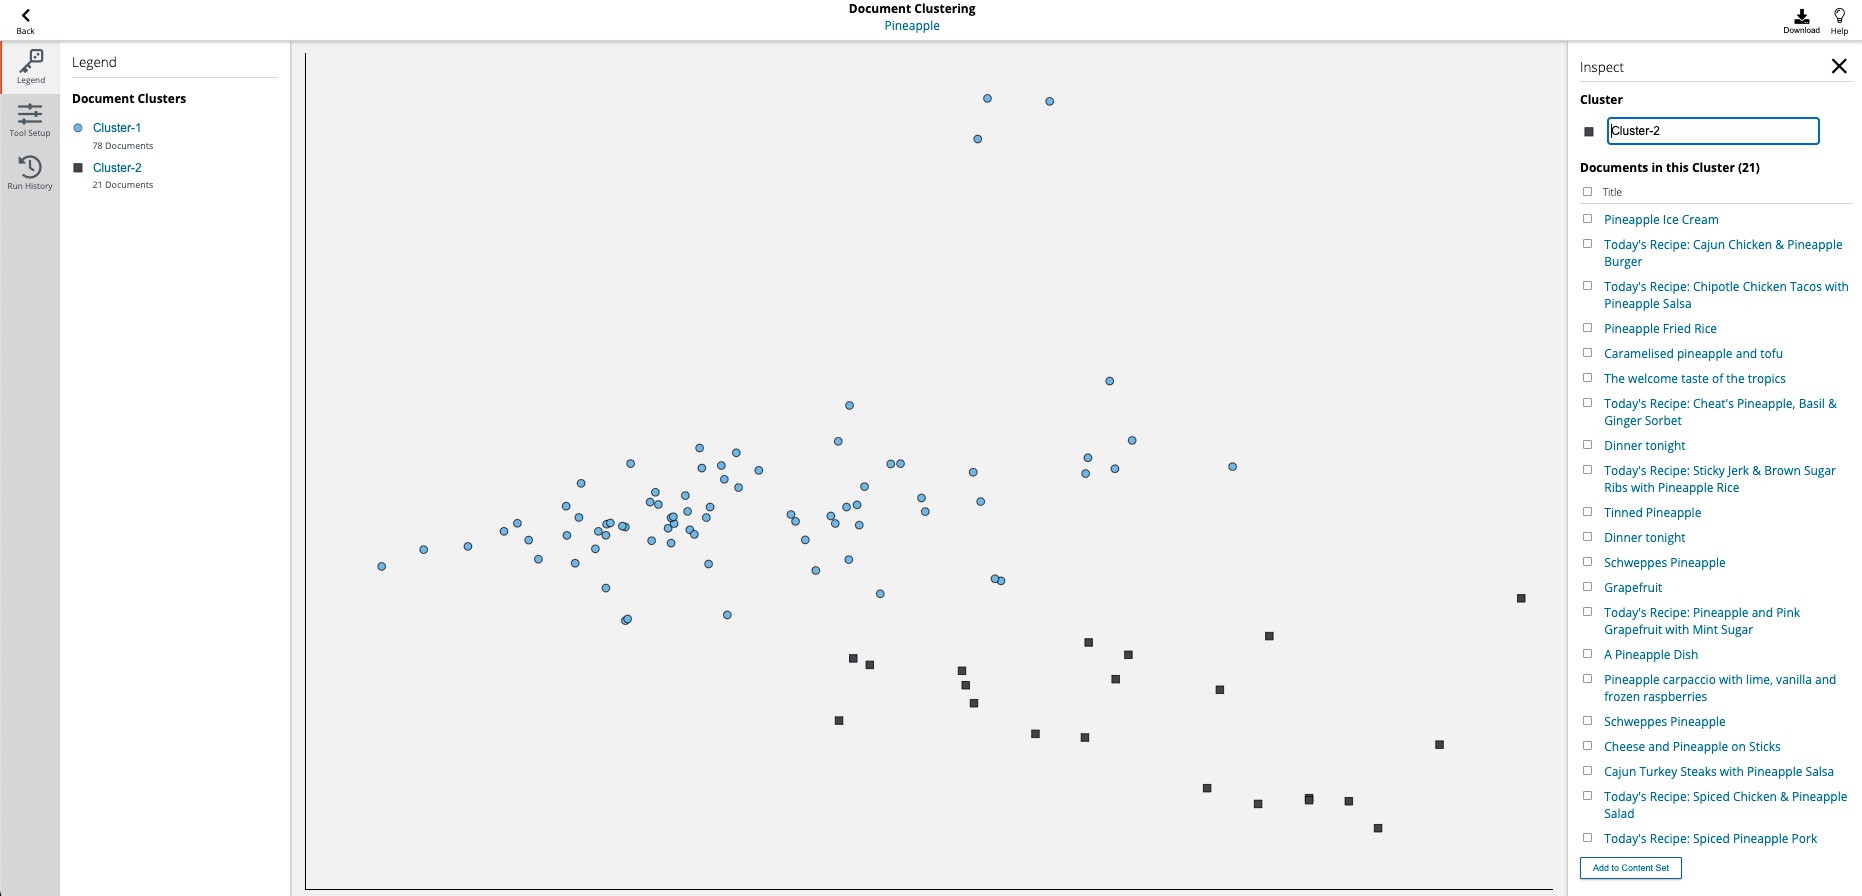 A screenshot of the scatter plot result from the document clustering tool.